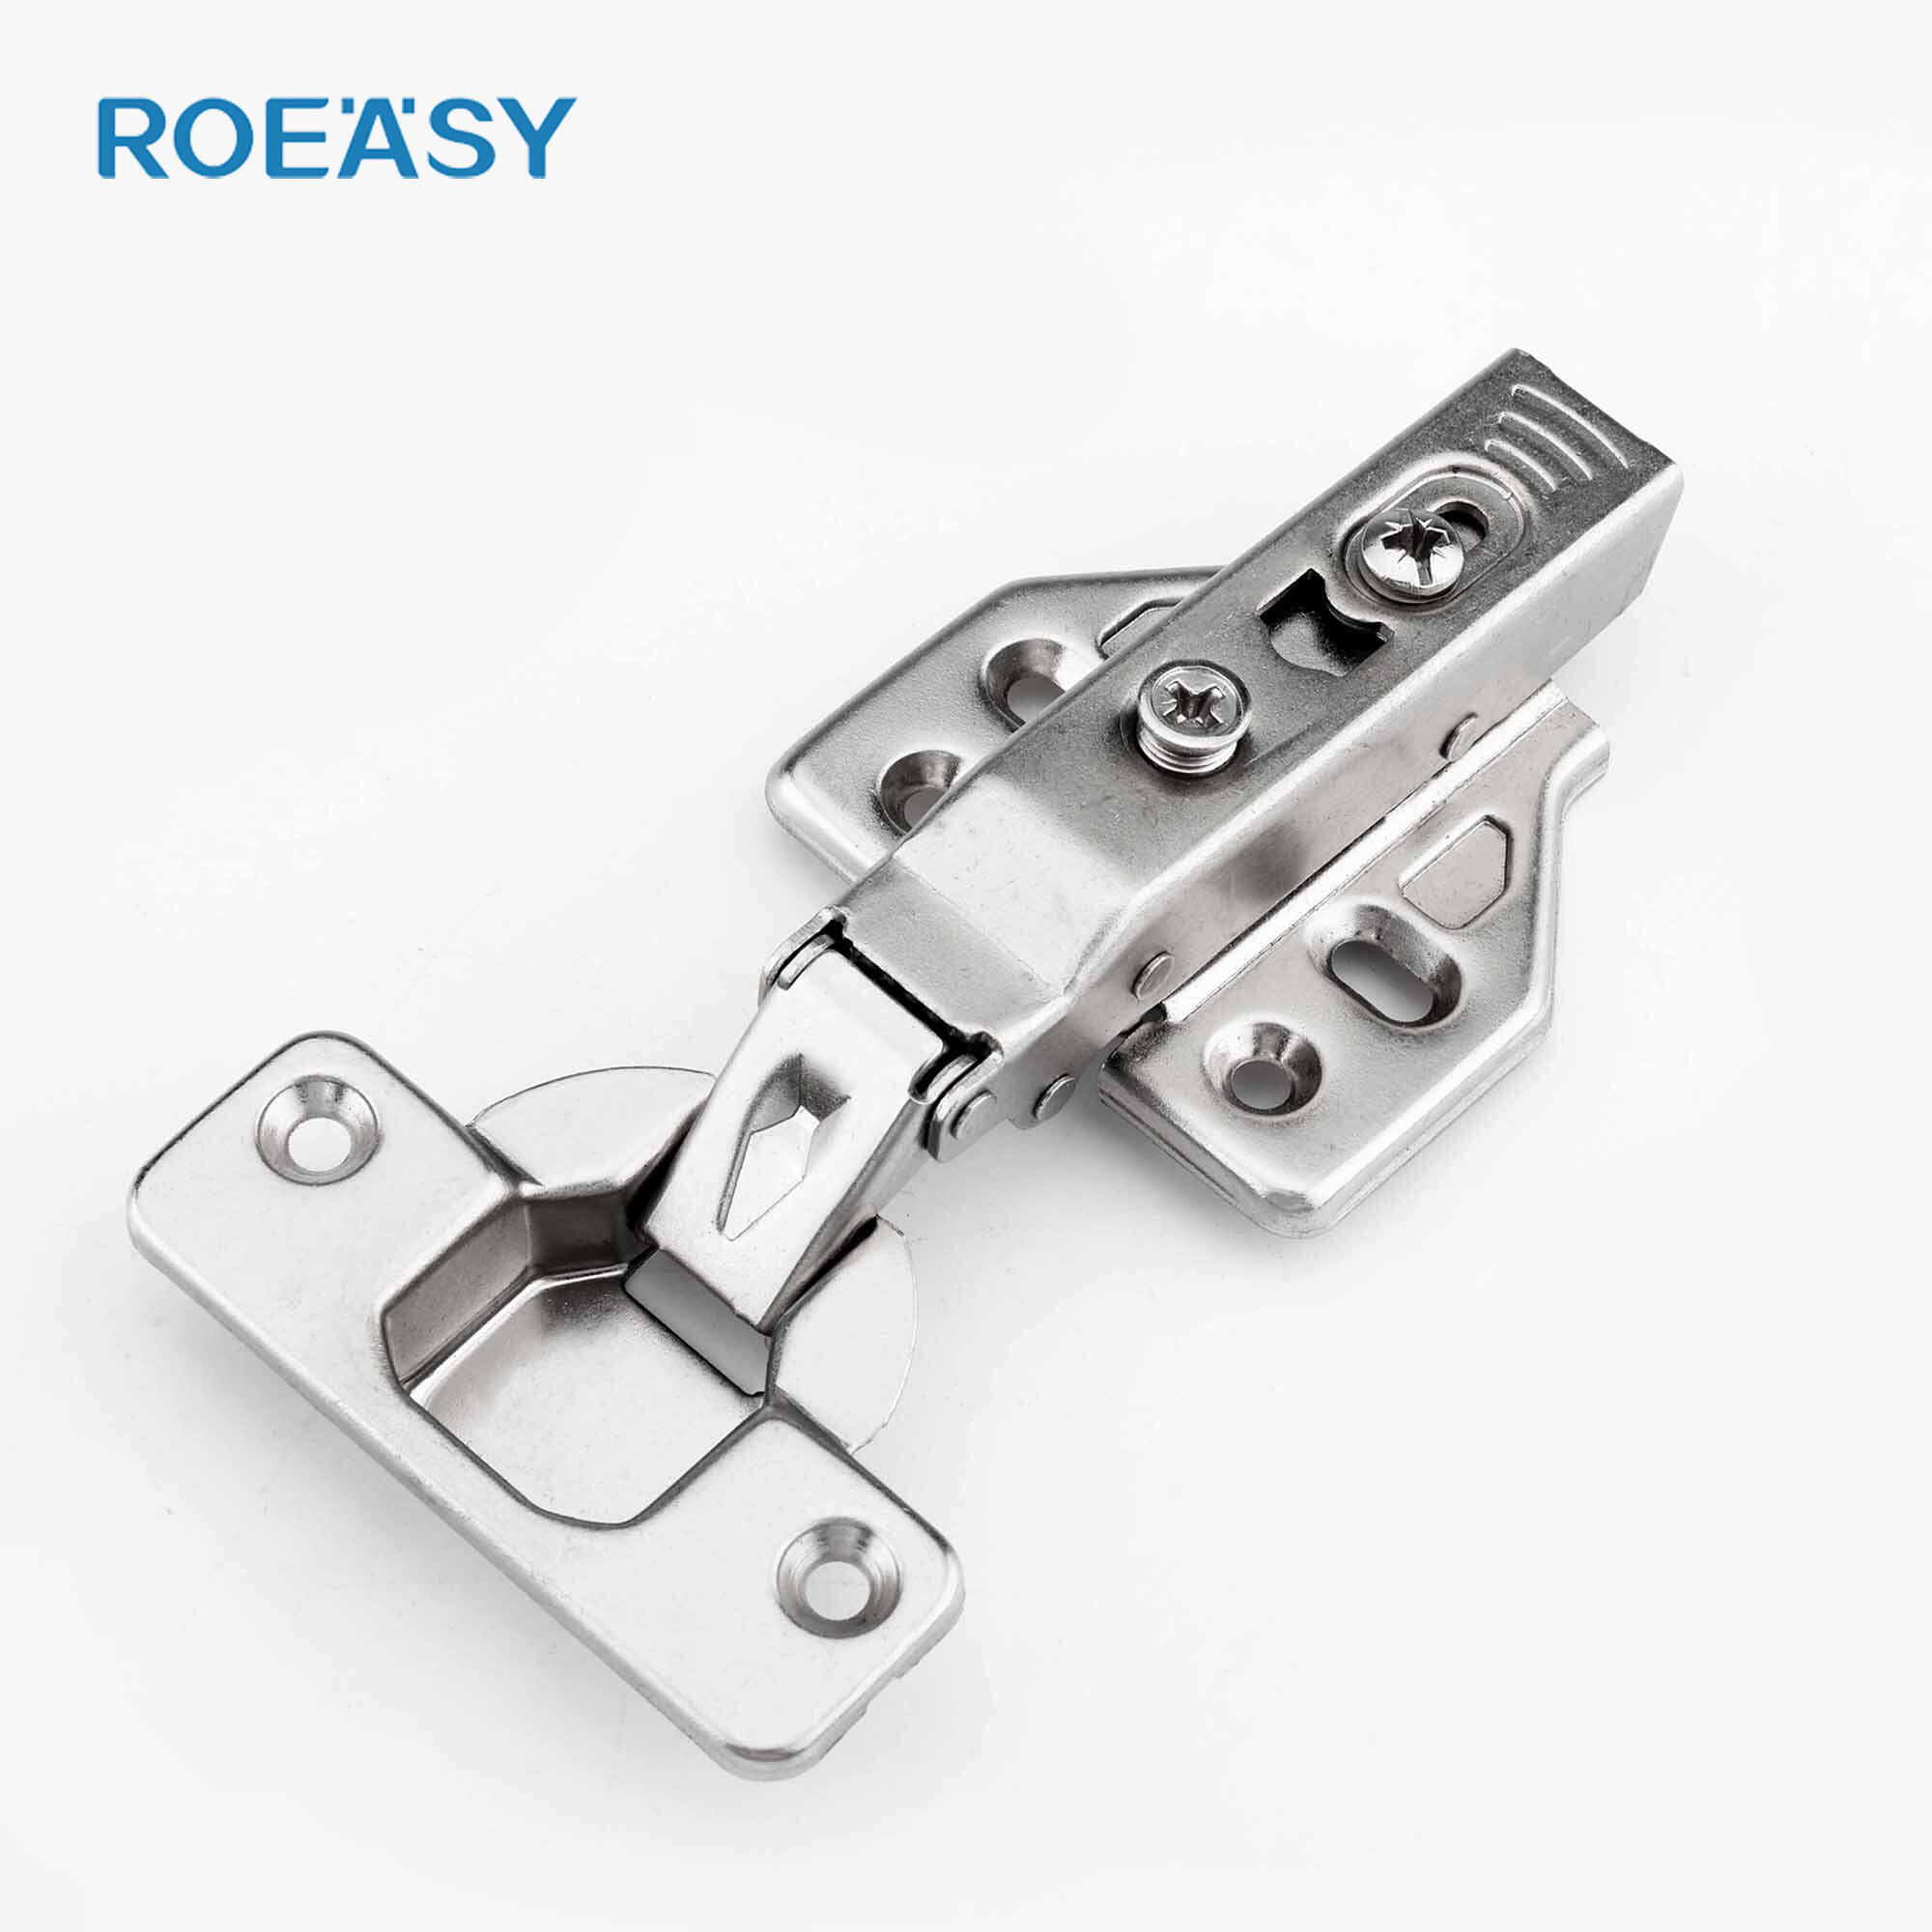 Roeasy CH-293A 35mm 90 degree hinge clip-on soft close cabinet hinge